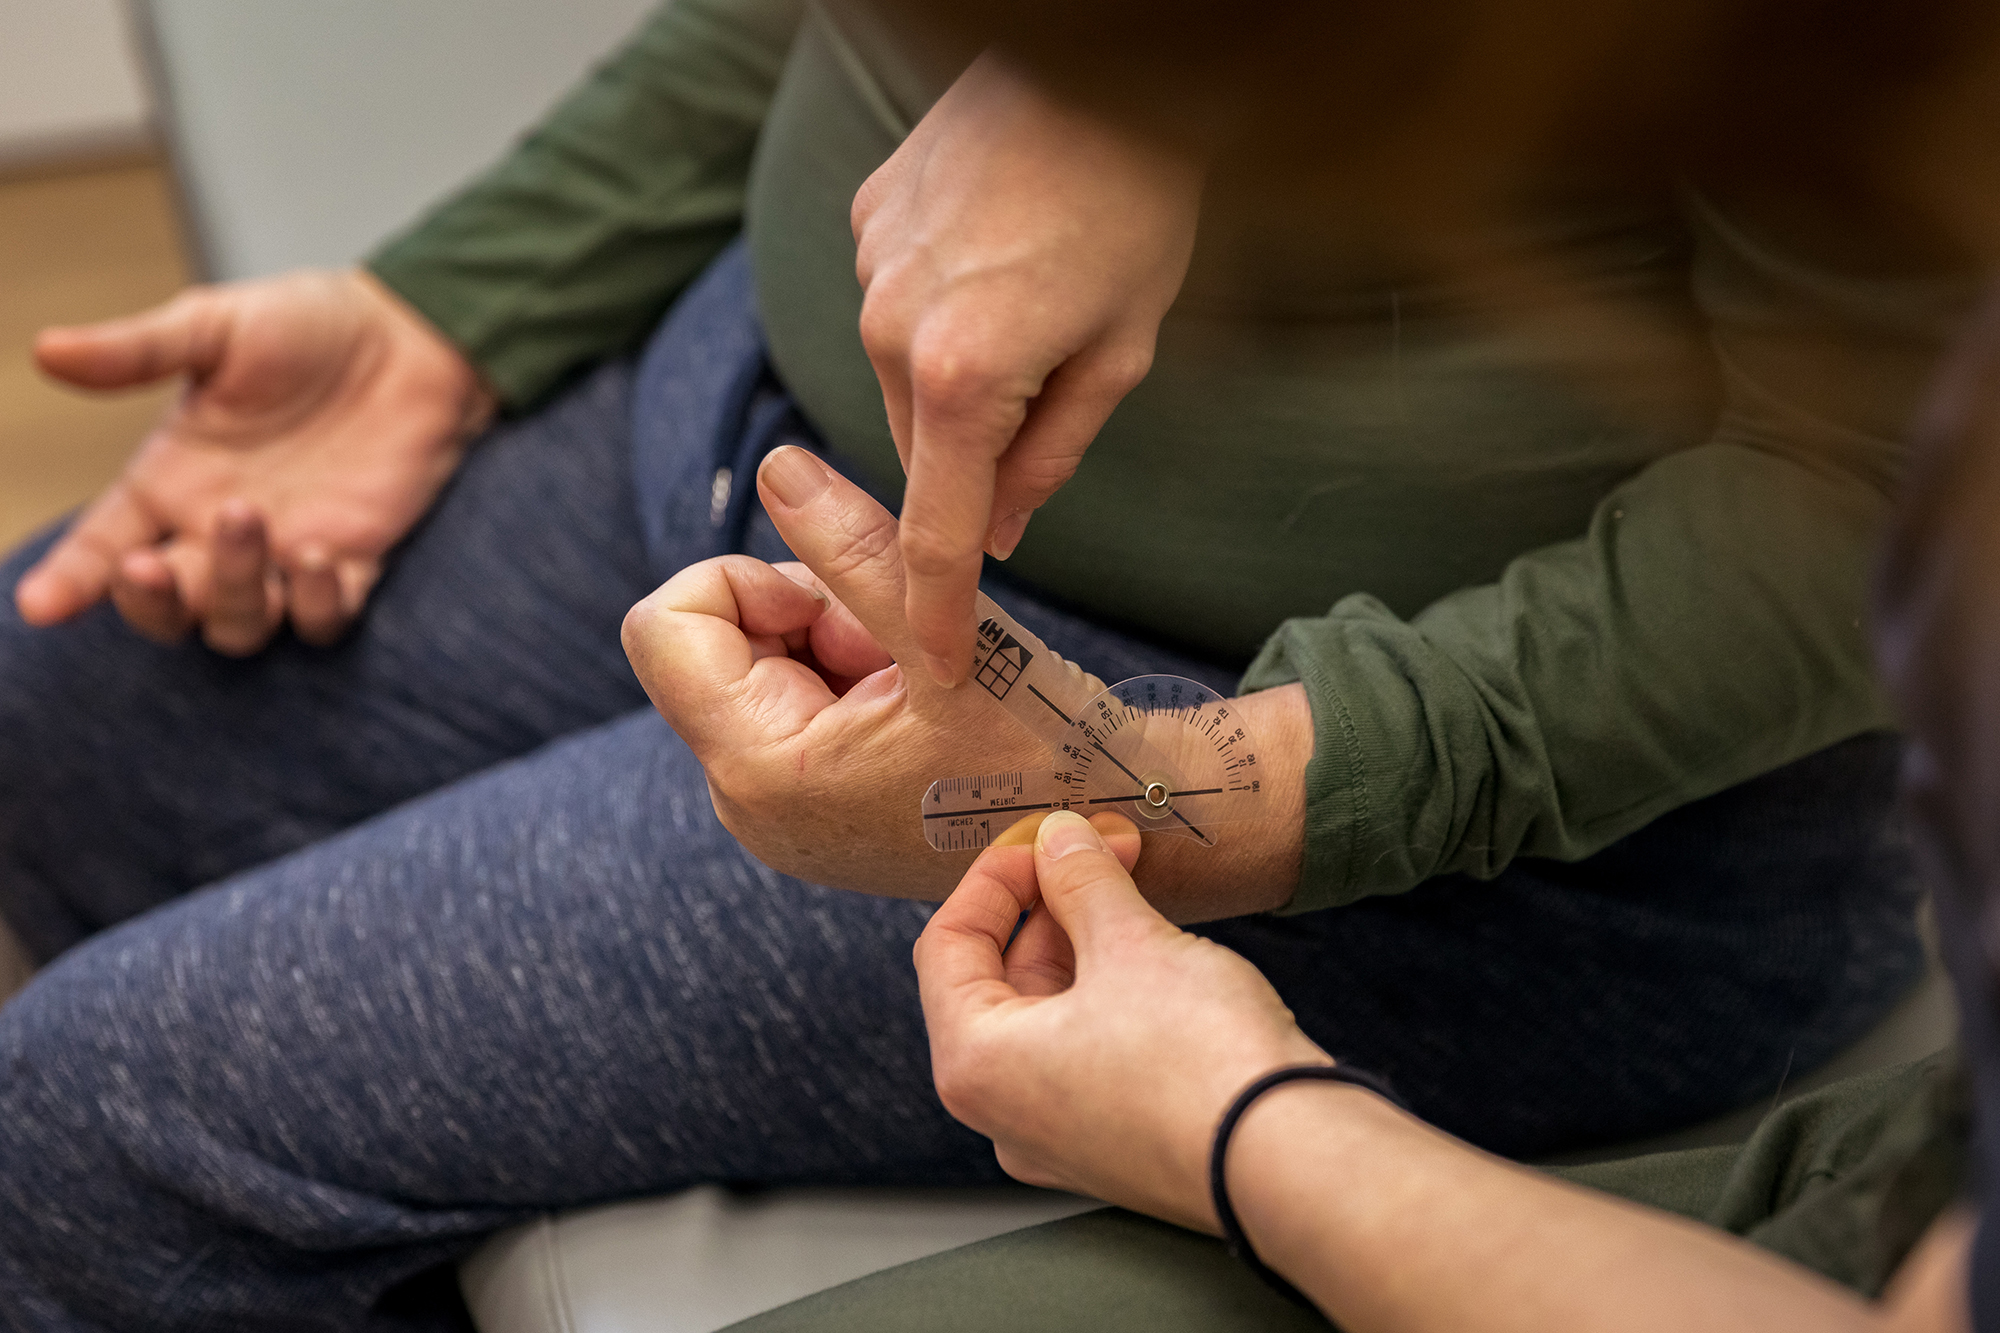 a student uses a measuring tool on cheryl overstreet's hand during a therapy session